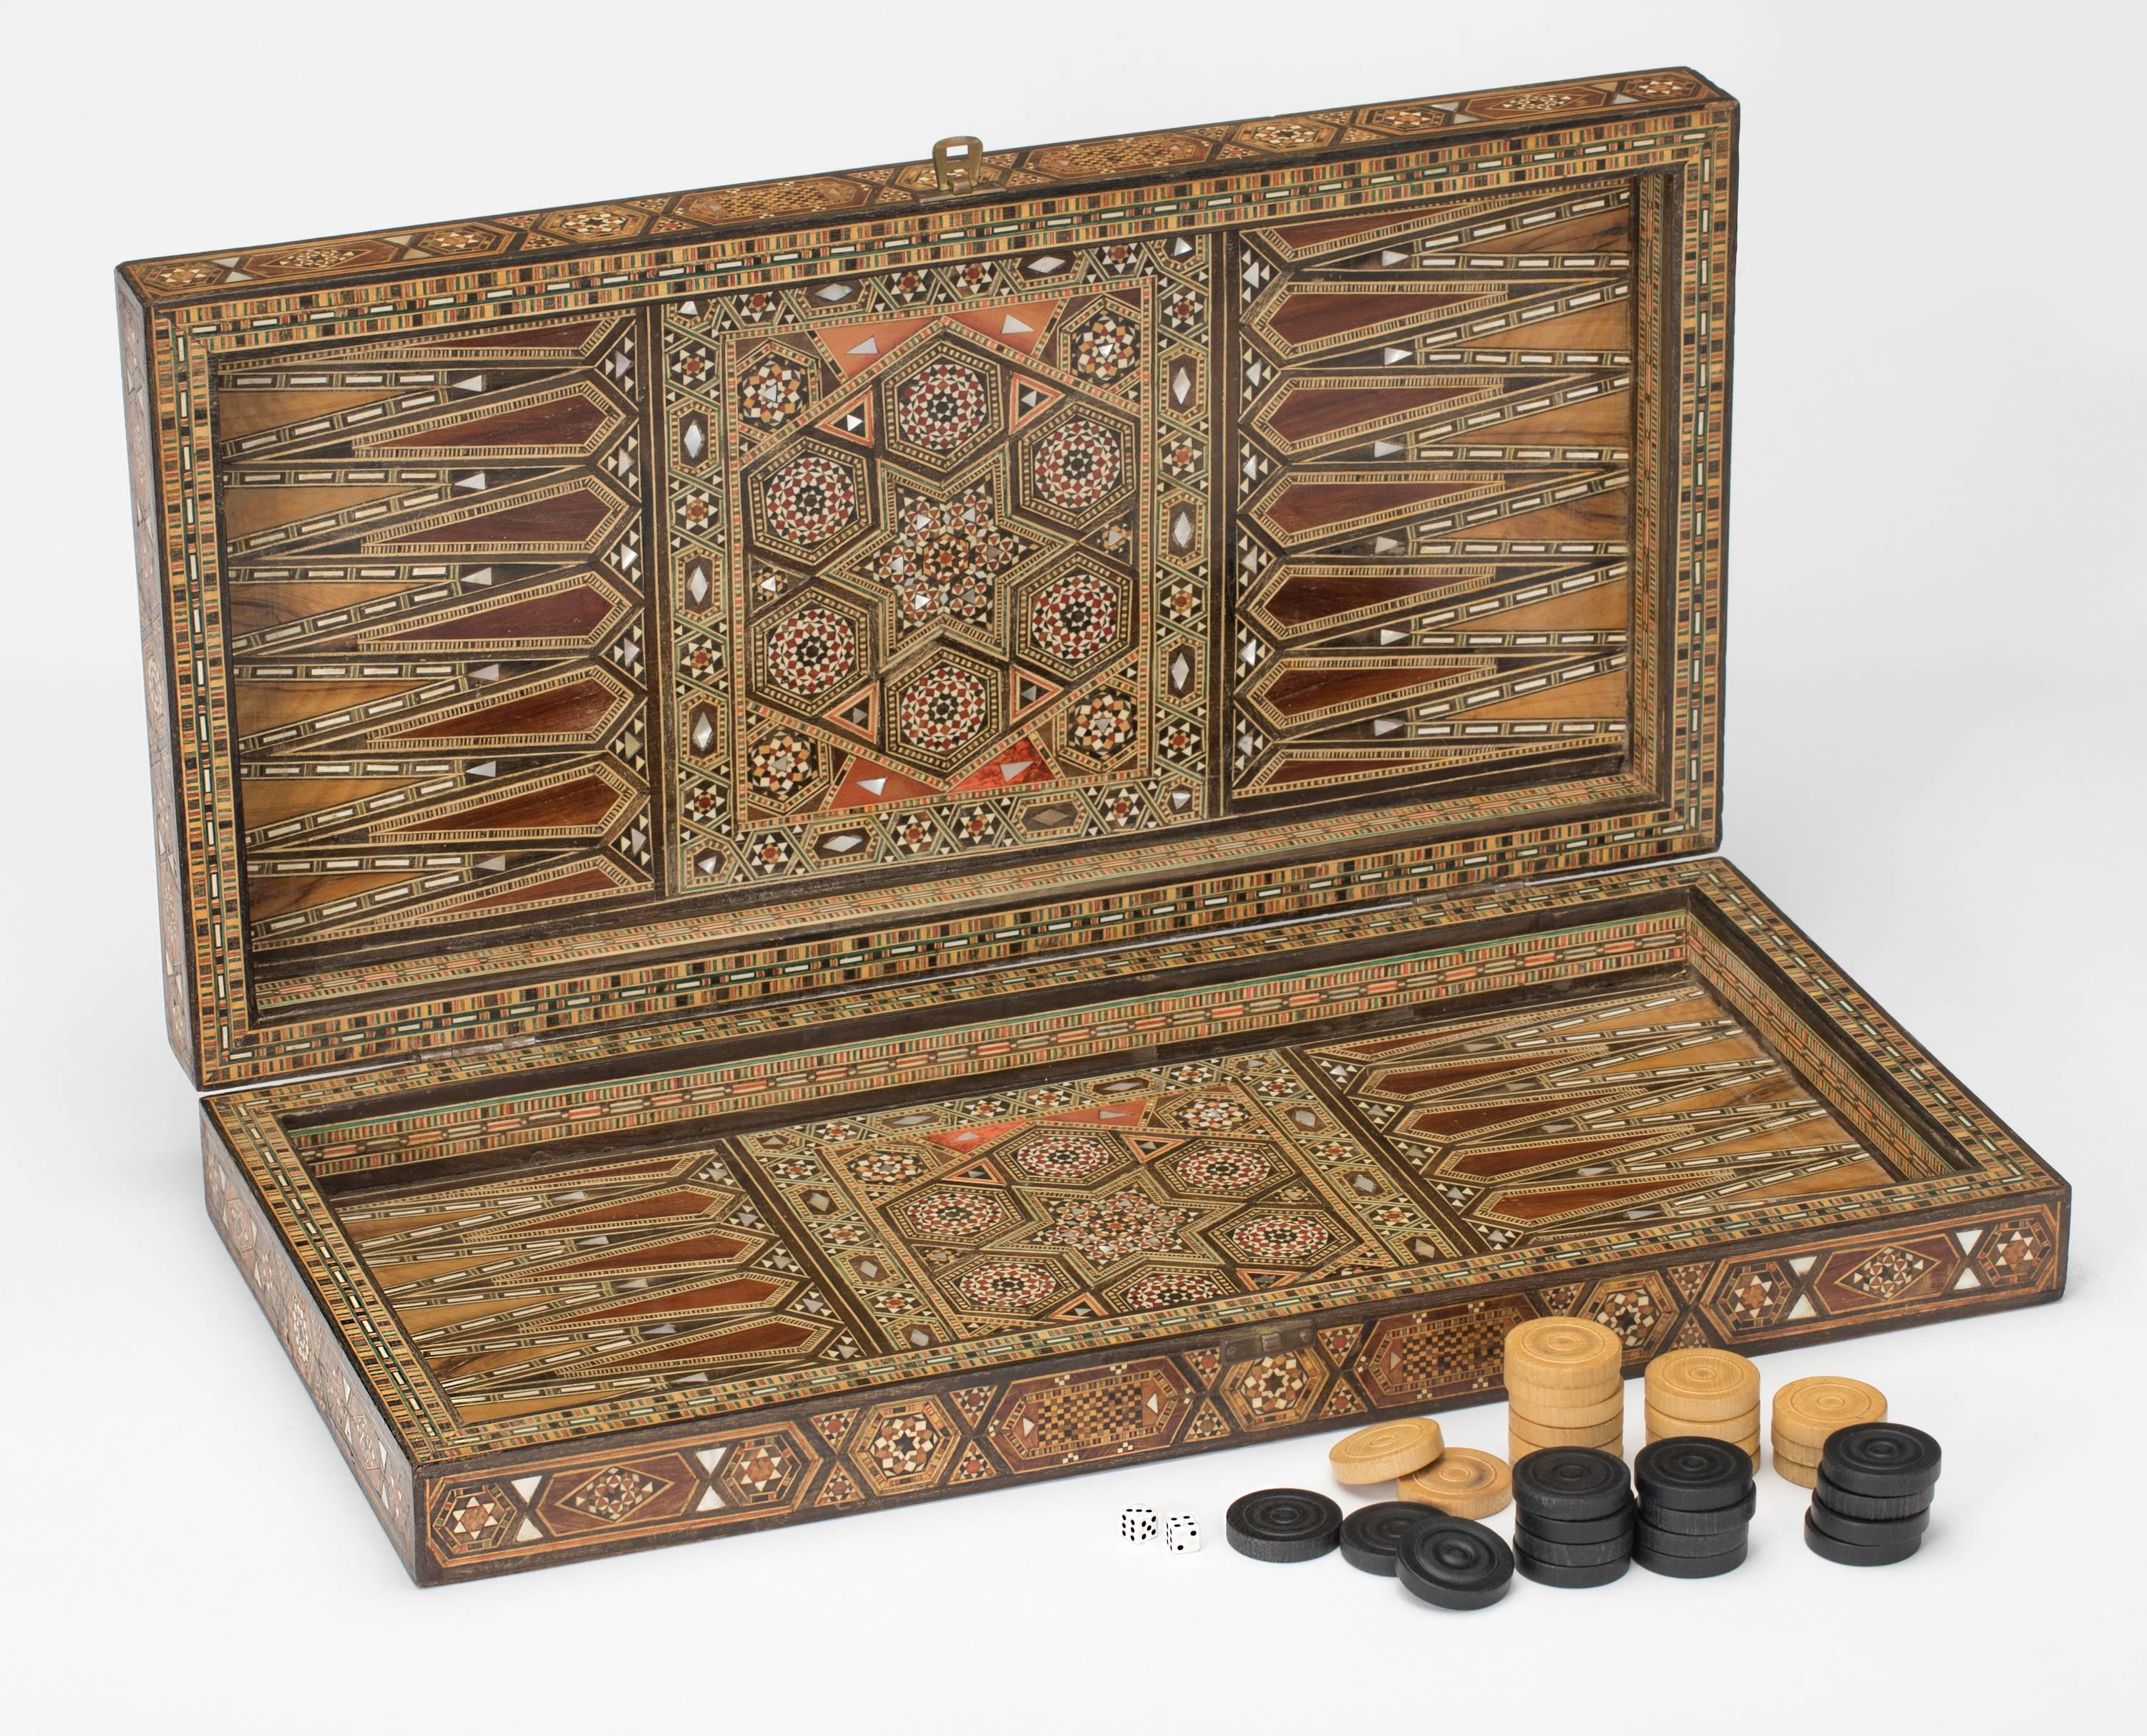 Backgammon board box in Intricate inlaid mosaic of various wood, mother-of-pearl and bone. Excellent condition. Complete with disks and dice.

Measures: 20 x 20 when open.
   